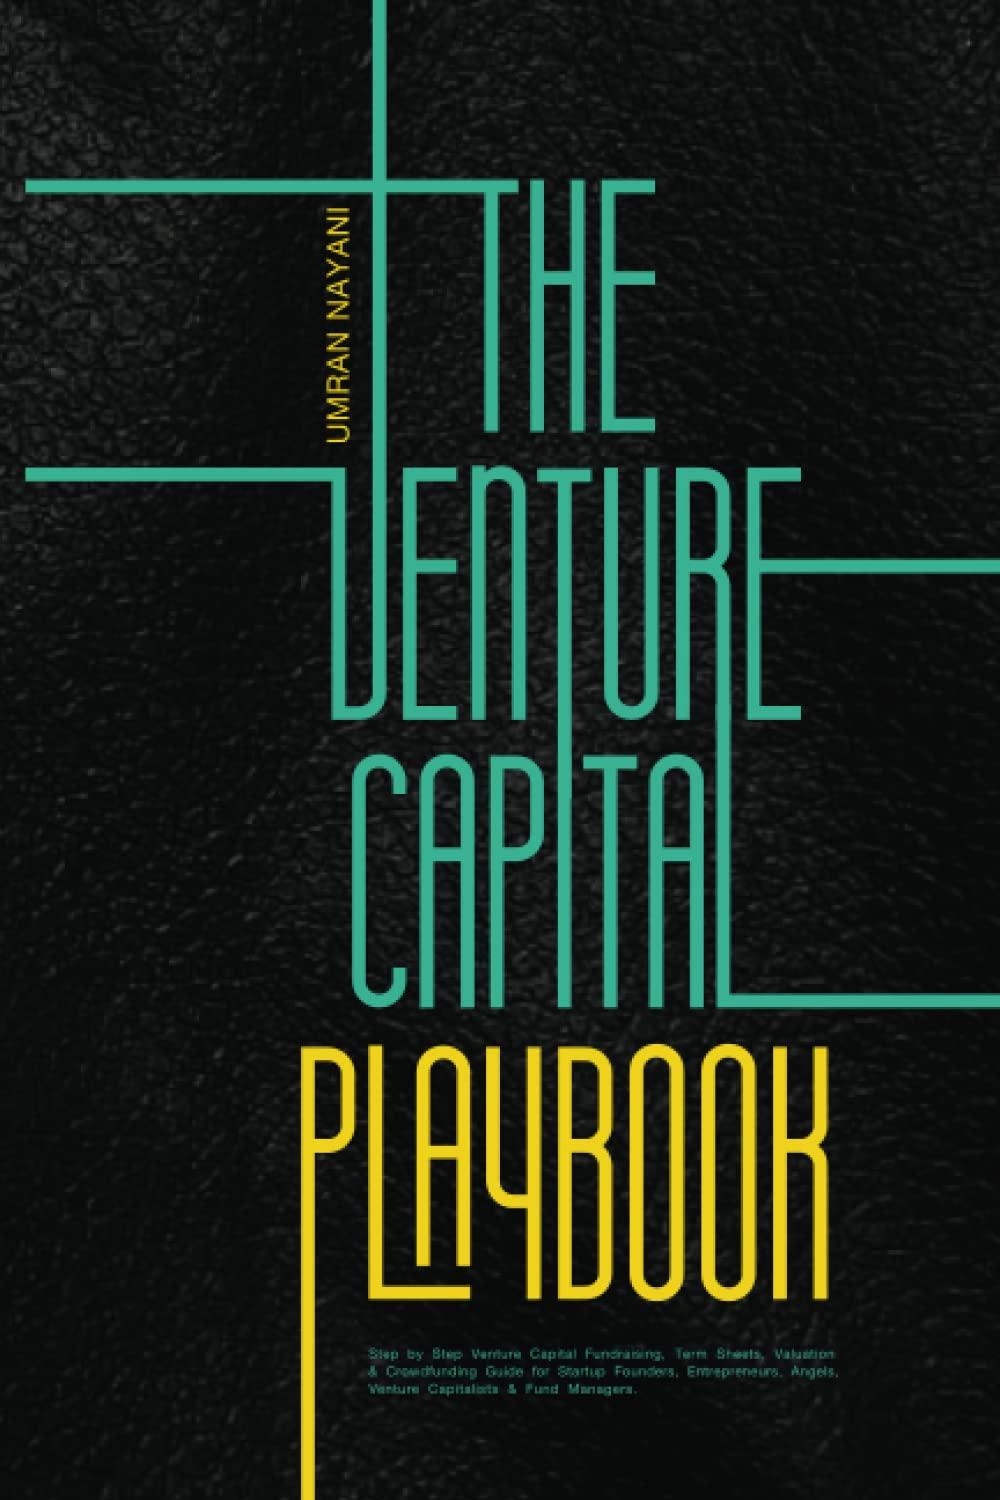 The Venture Capital Playbook Step By Step Venture Capital Fundraising Term Sheets Valuation And Crowdfunding Guide For Startup Founders Entrepreneurs Angels Venture Capitalists And Fund Managers